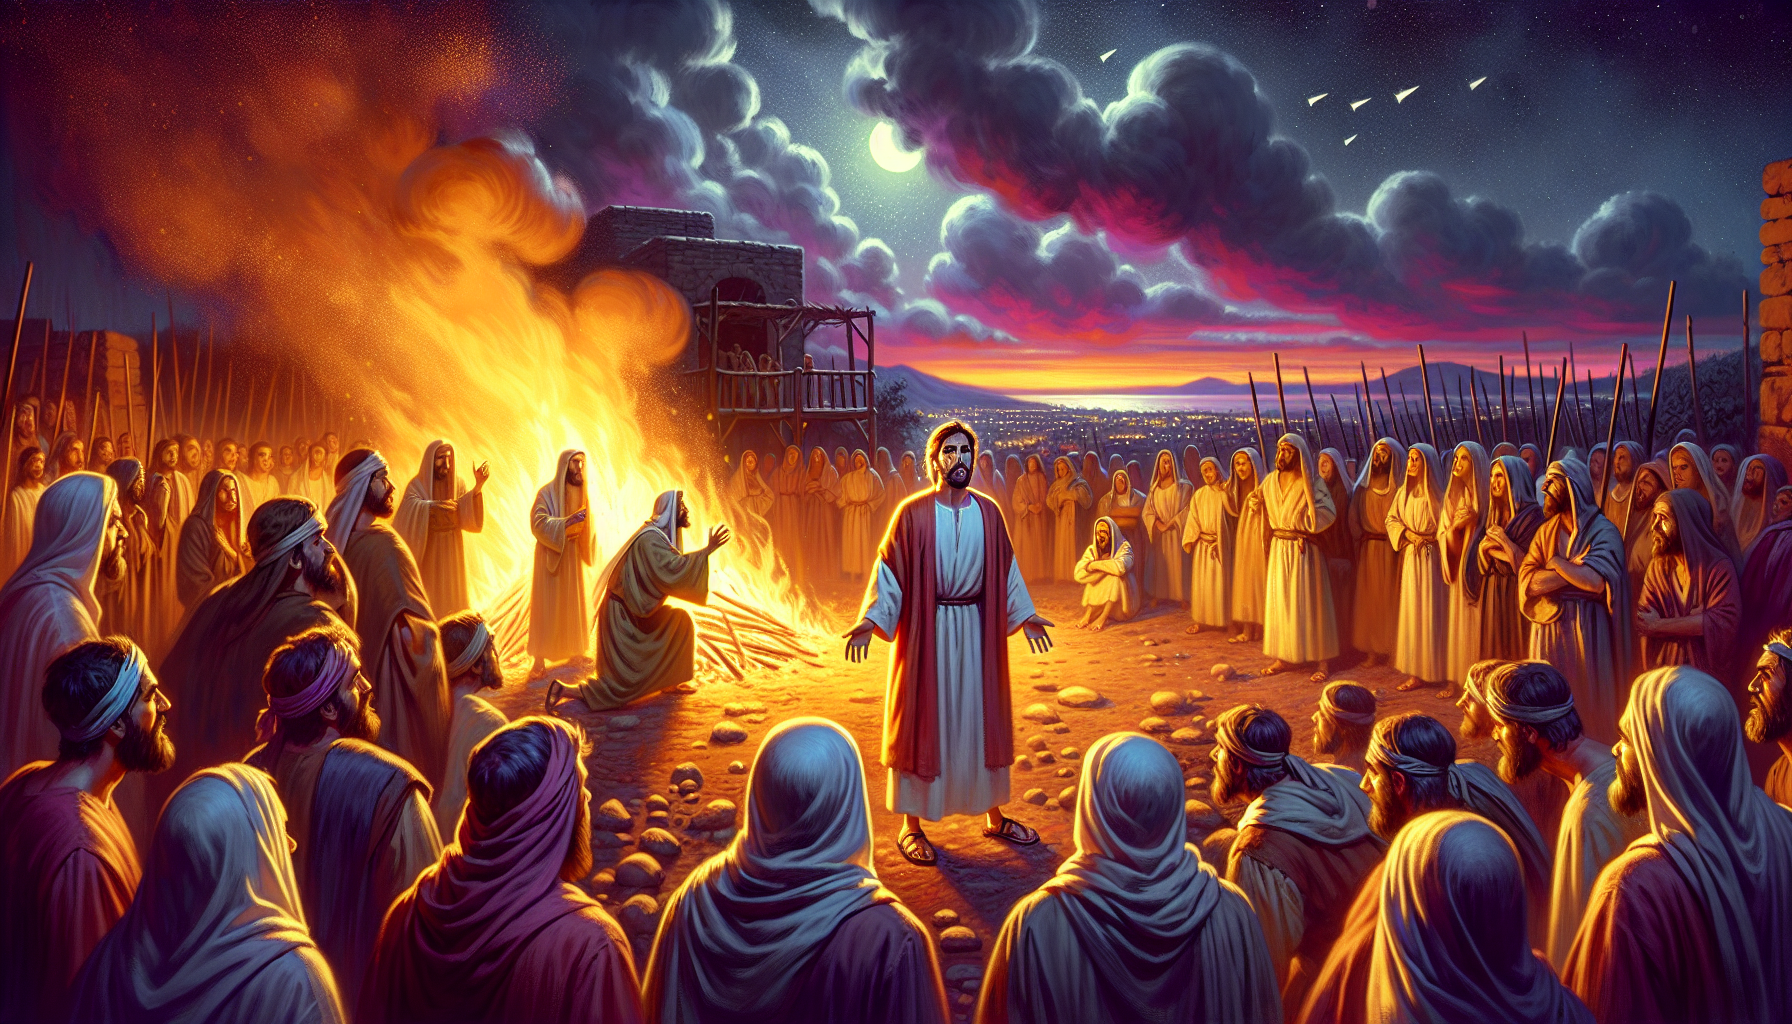 Create an illustrative scene portraying the biblical moment from Matthew 26:69-75 when Peter denies Jesus three times. Imagine Peter with a worried expression, surrounded by people near a warm, glowin